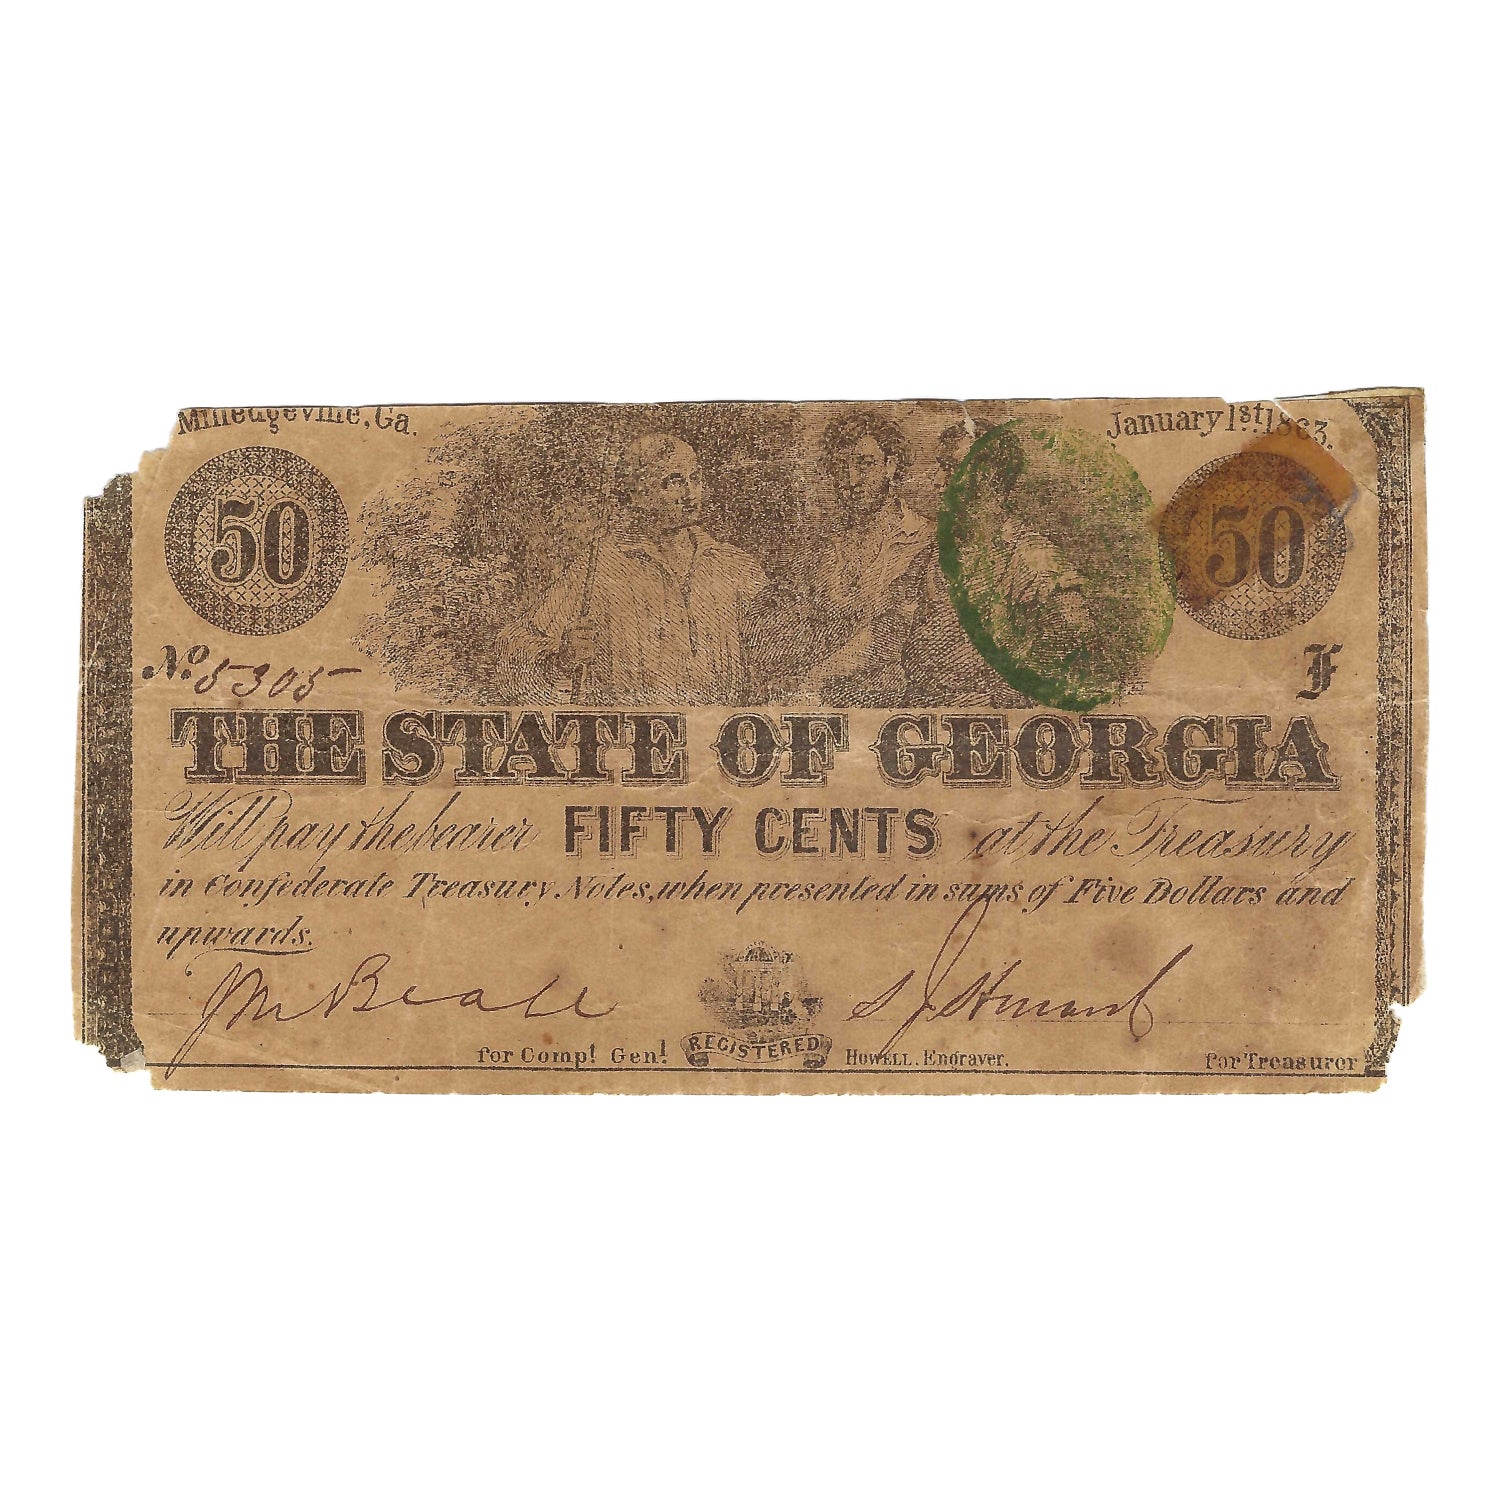 1863 50 Cent Obsolete Bank Note, State of Georgia, Circulated Conditon